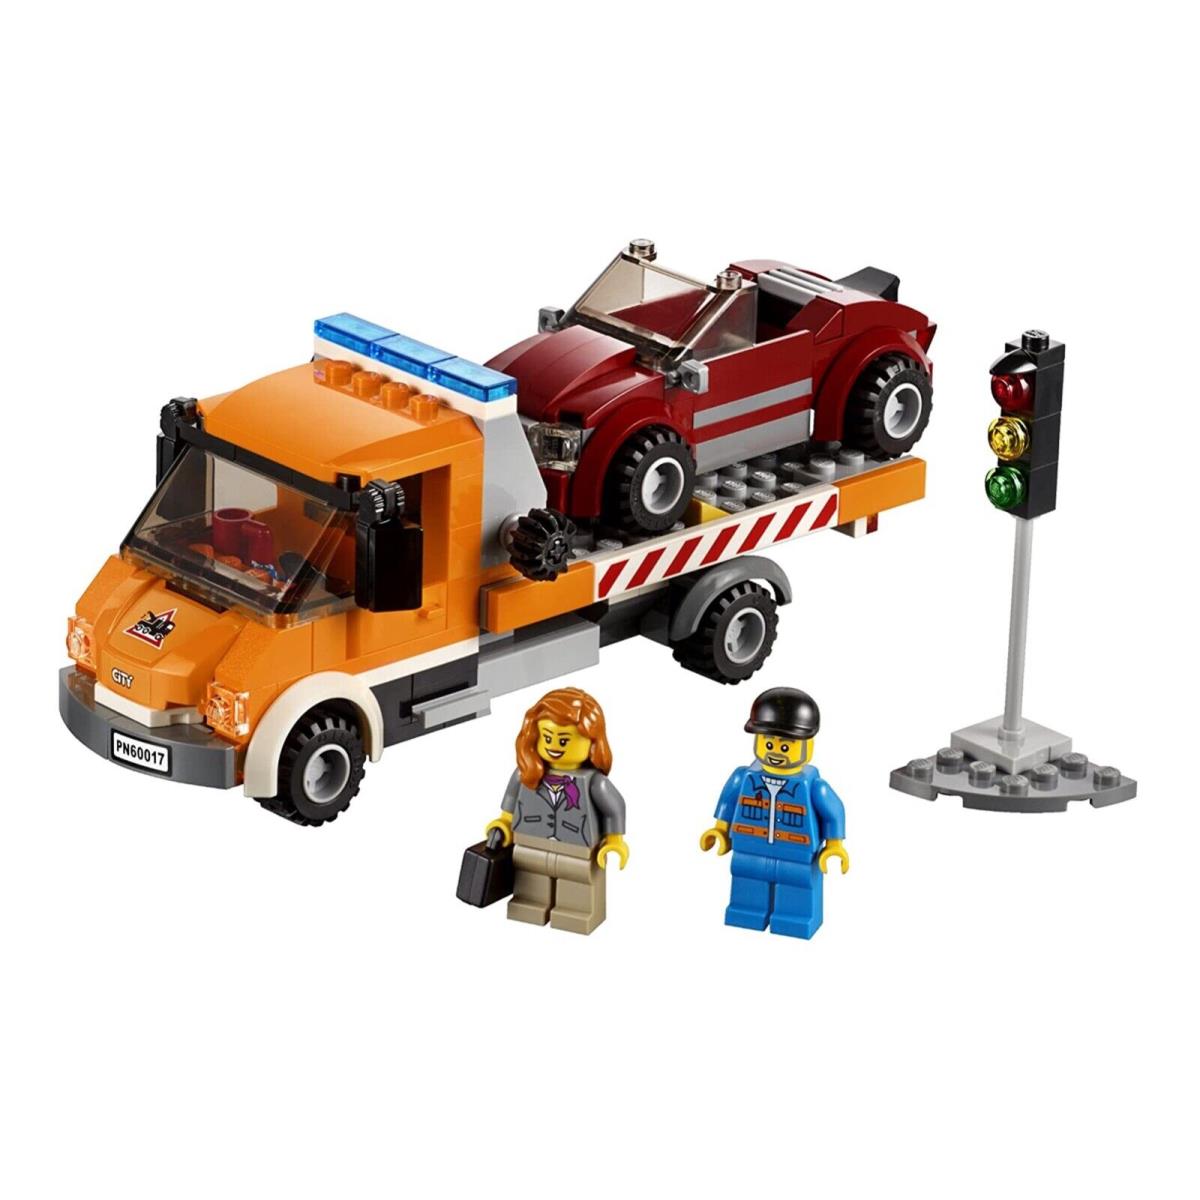 Lego toy Flatbed Truck